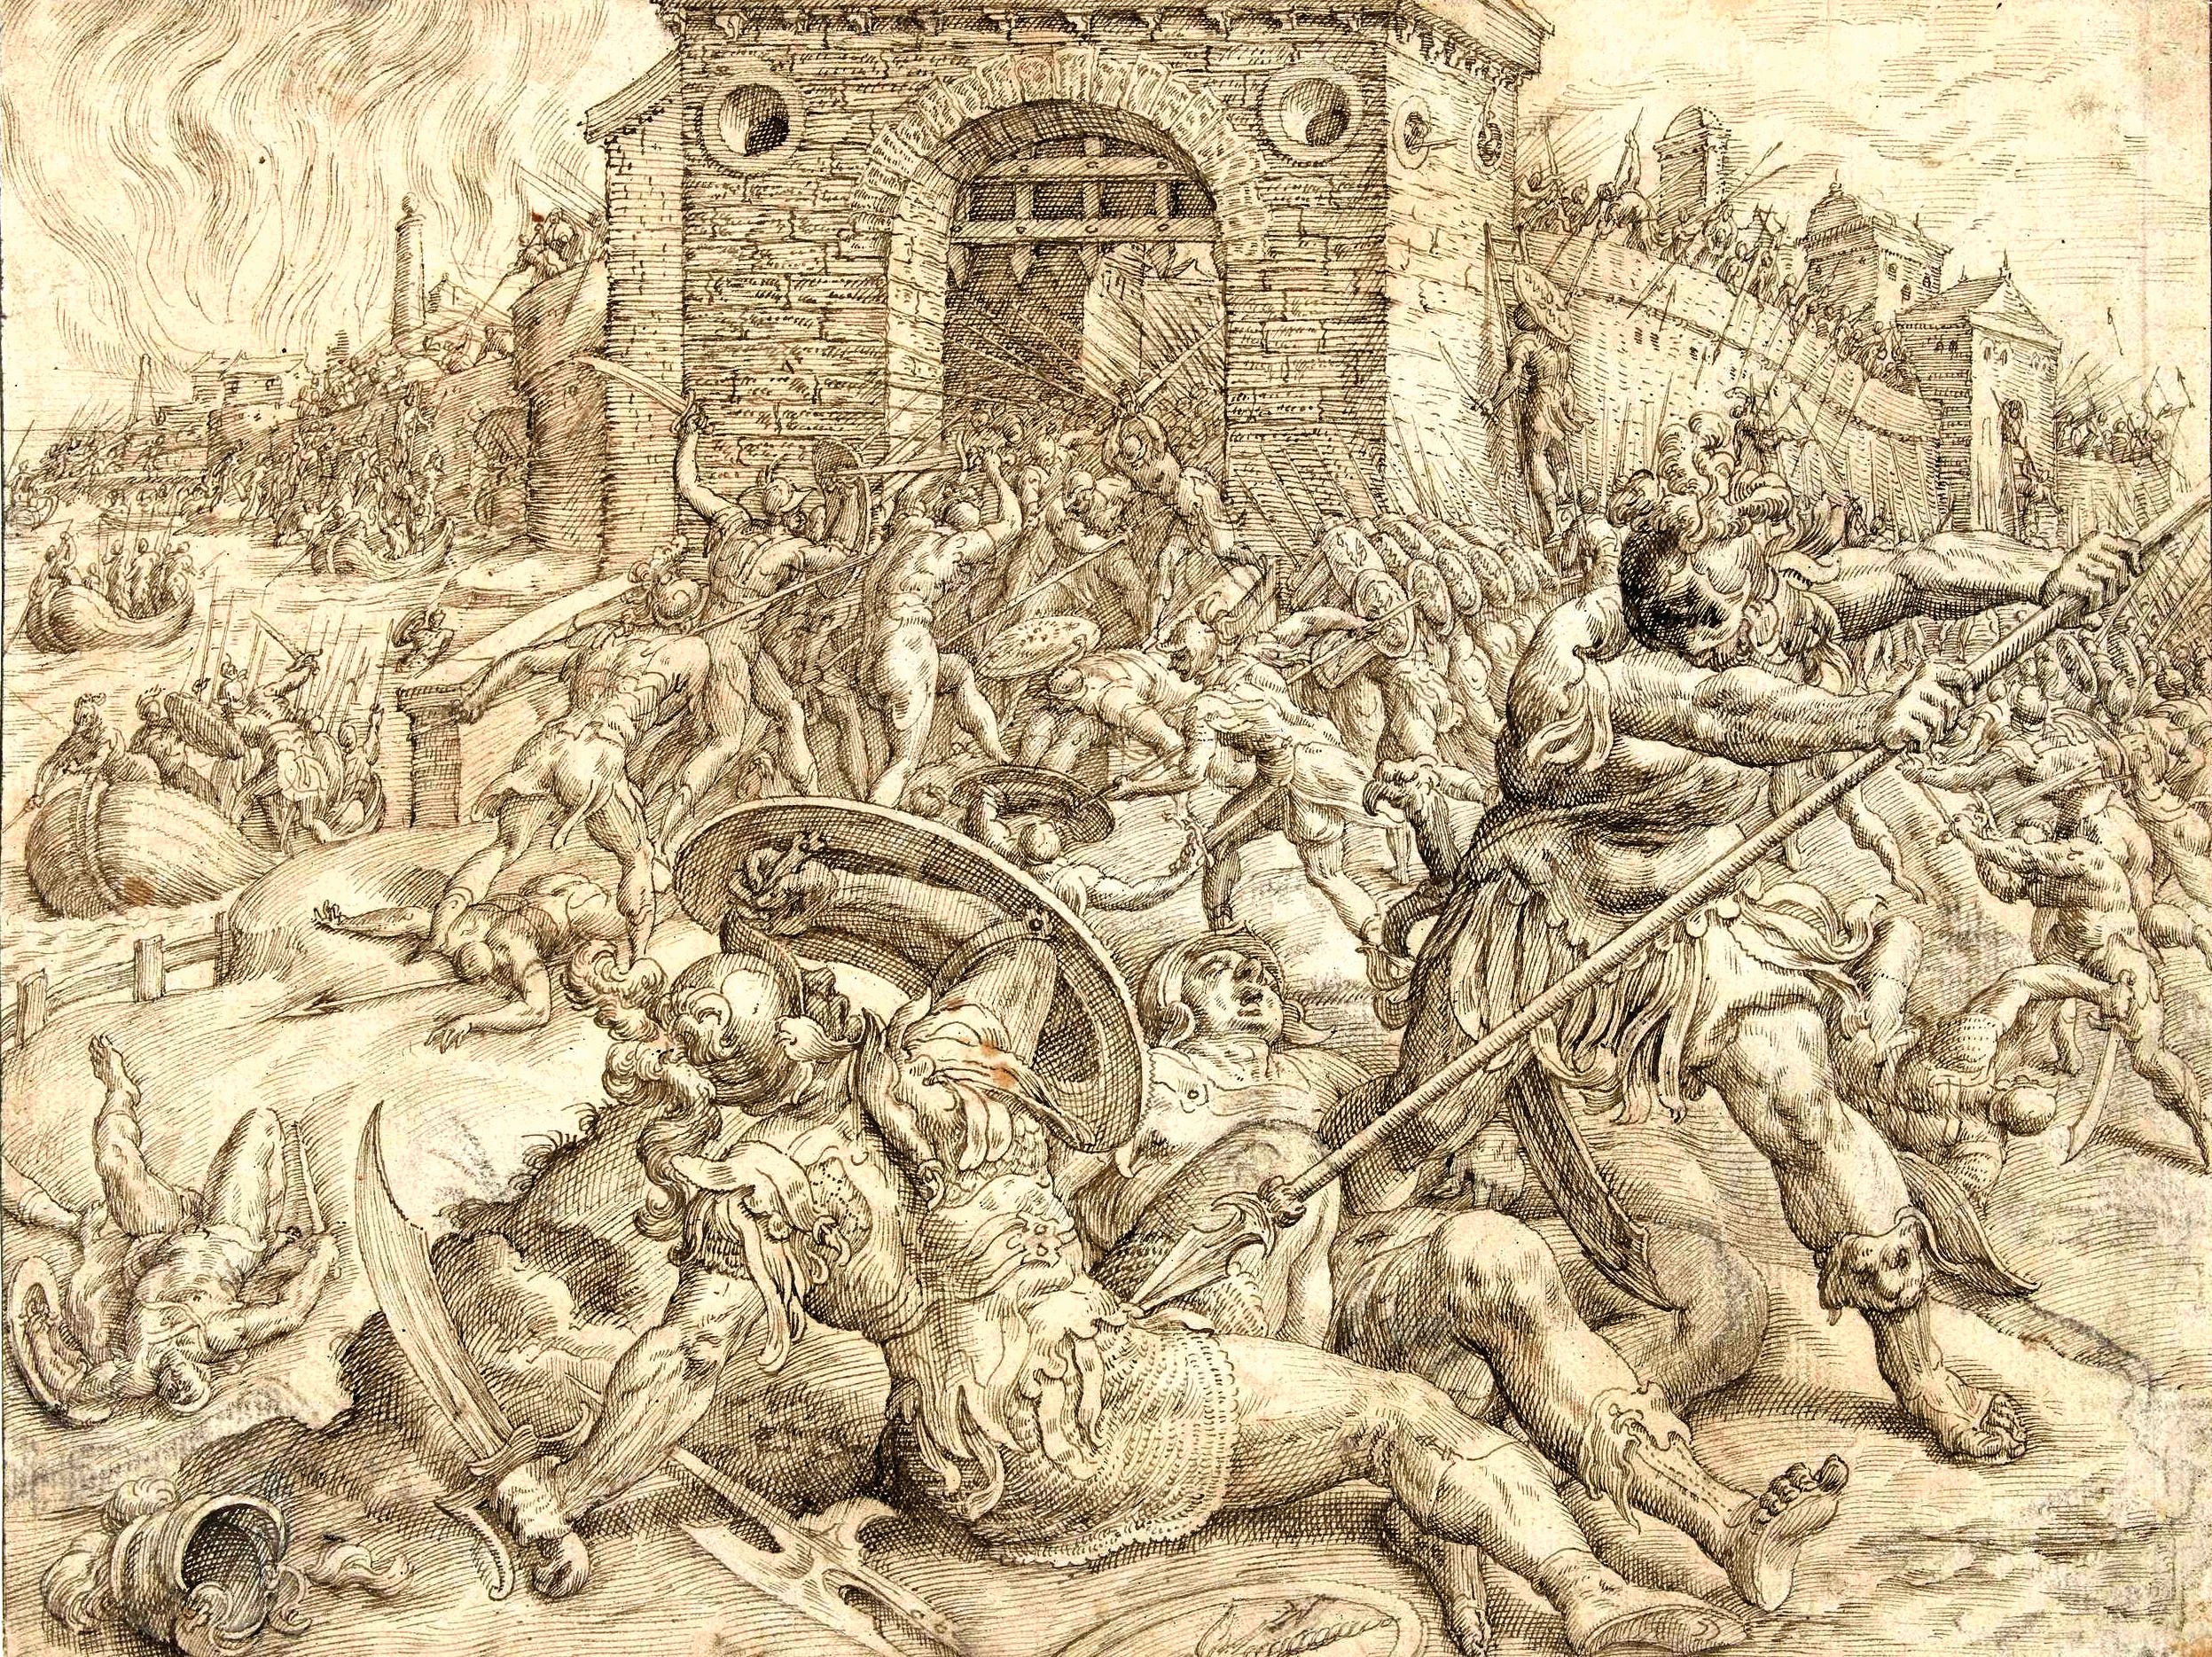 “Conquest of Carthage by Scipio Africanus,” by Gerard van Groeningen (Netherlands, 1515–1599) shows fighting outside the walls of Carthage. Expecting a surrender, the Romans were surprised when the Carthagians left the fortified city to attack.